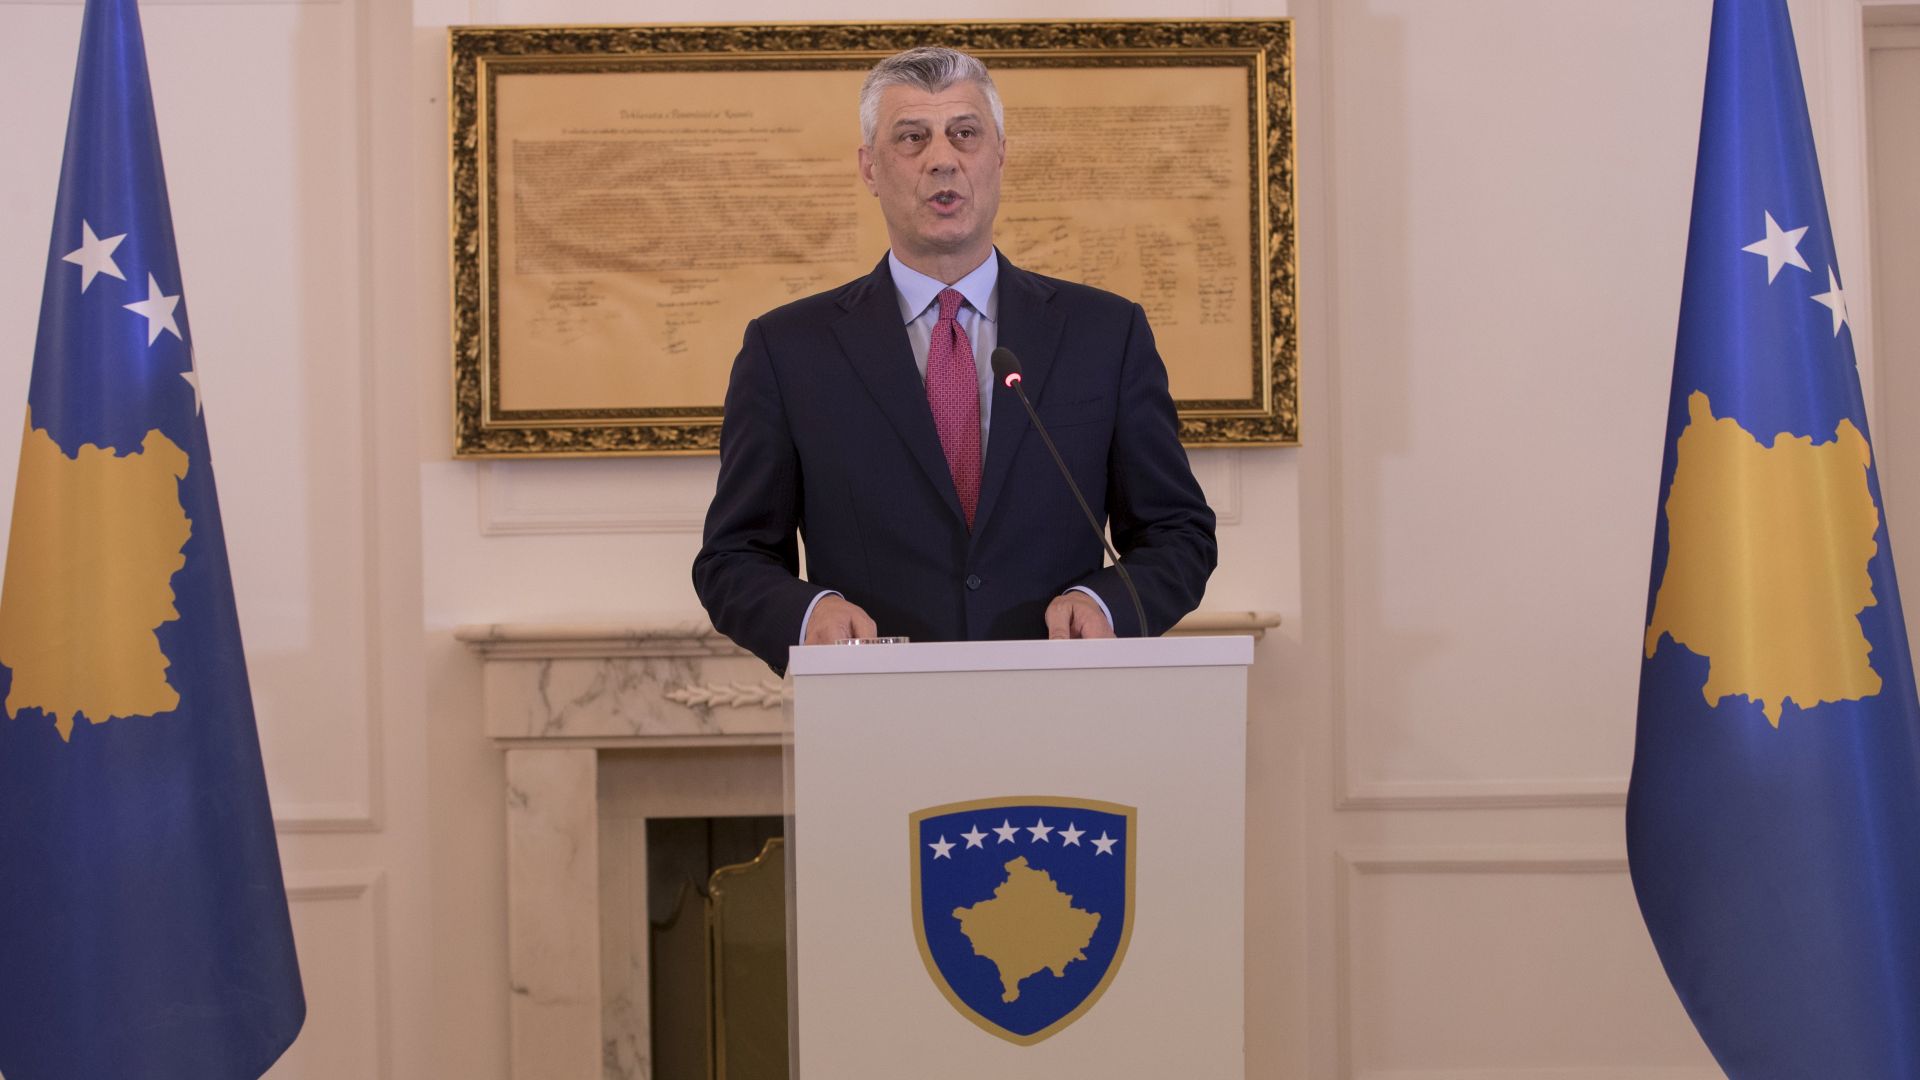 epa05837114 President of the Republic of Kosovo Hashim Thaci during a press conference at his cabinet in Pristina, Kosovo 08 March 2017. Hashim Thaci backed up his decision he took on 07 March 2017 to submit to the Parliament the draft law on transforming the Kosovo Security Forces (KSF) into an Army. NATO Secretary General Jens Stoltenberg has released a statement saying that on 08 March 2017 he has spoken to Hashim Thaci to convey the serious concerns of NATO Allies about recent proposals by the Kosovo authorities to transform the Kosovo Security Force (KSF) into an armed force, without a constitutional change. However, should the mandate of the KSF now evolve in the way proposed, NATO will have to review its level of commitment, particularly in terms of capacity-building he said in the statement.  EPA/VALDRIN XHEMAJ